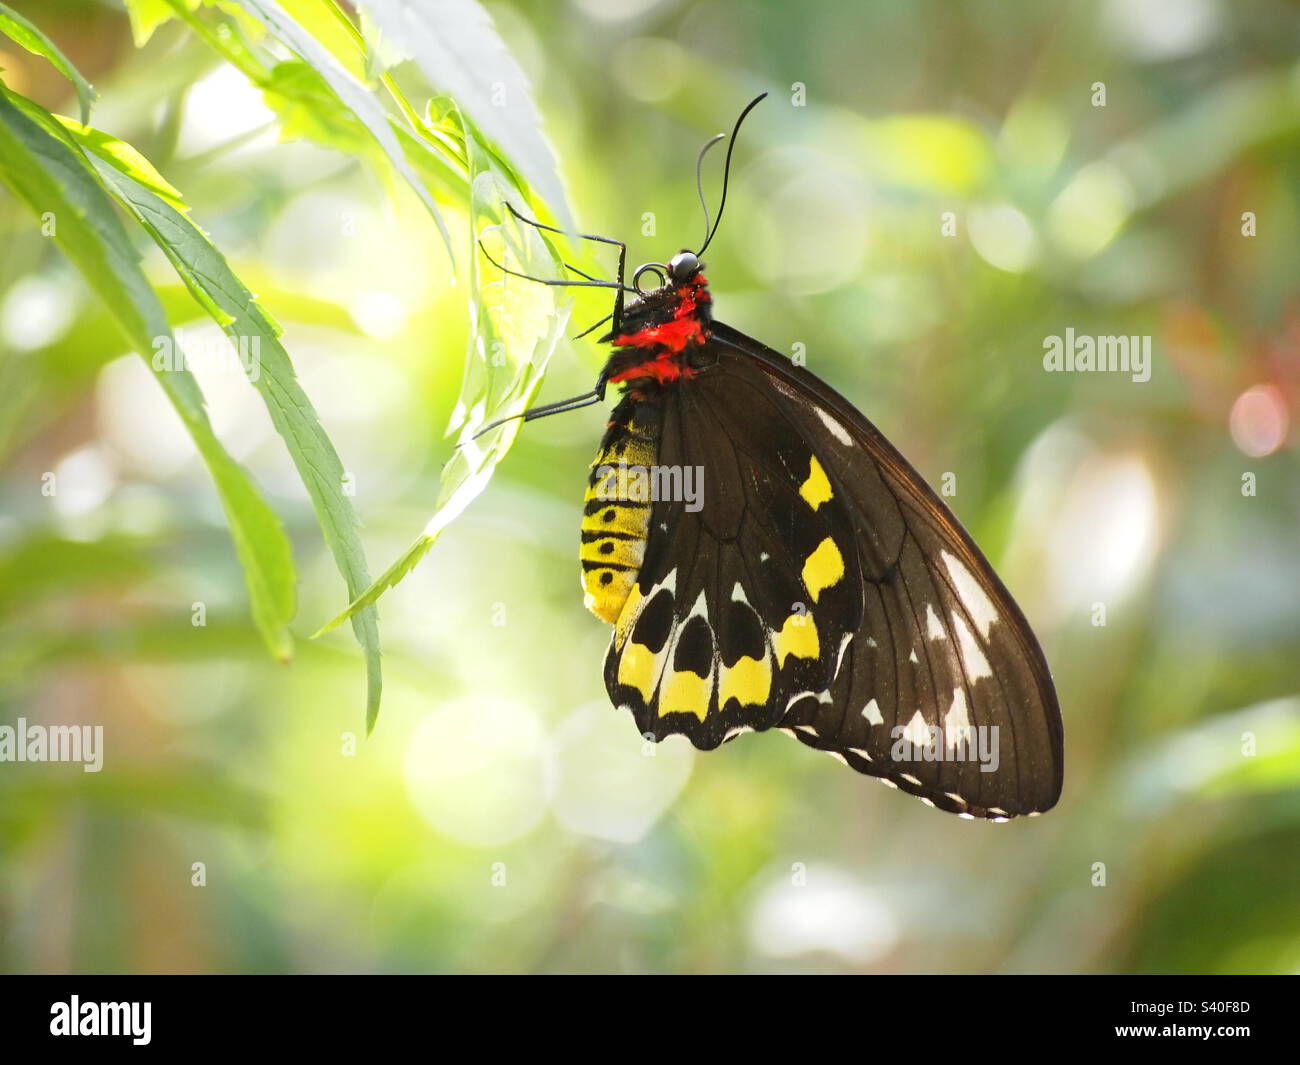 Butterfly black yellow red close up Stock Photo